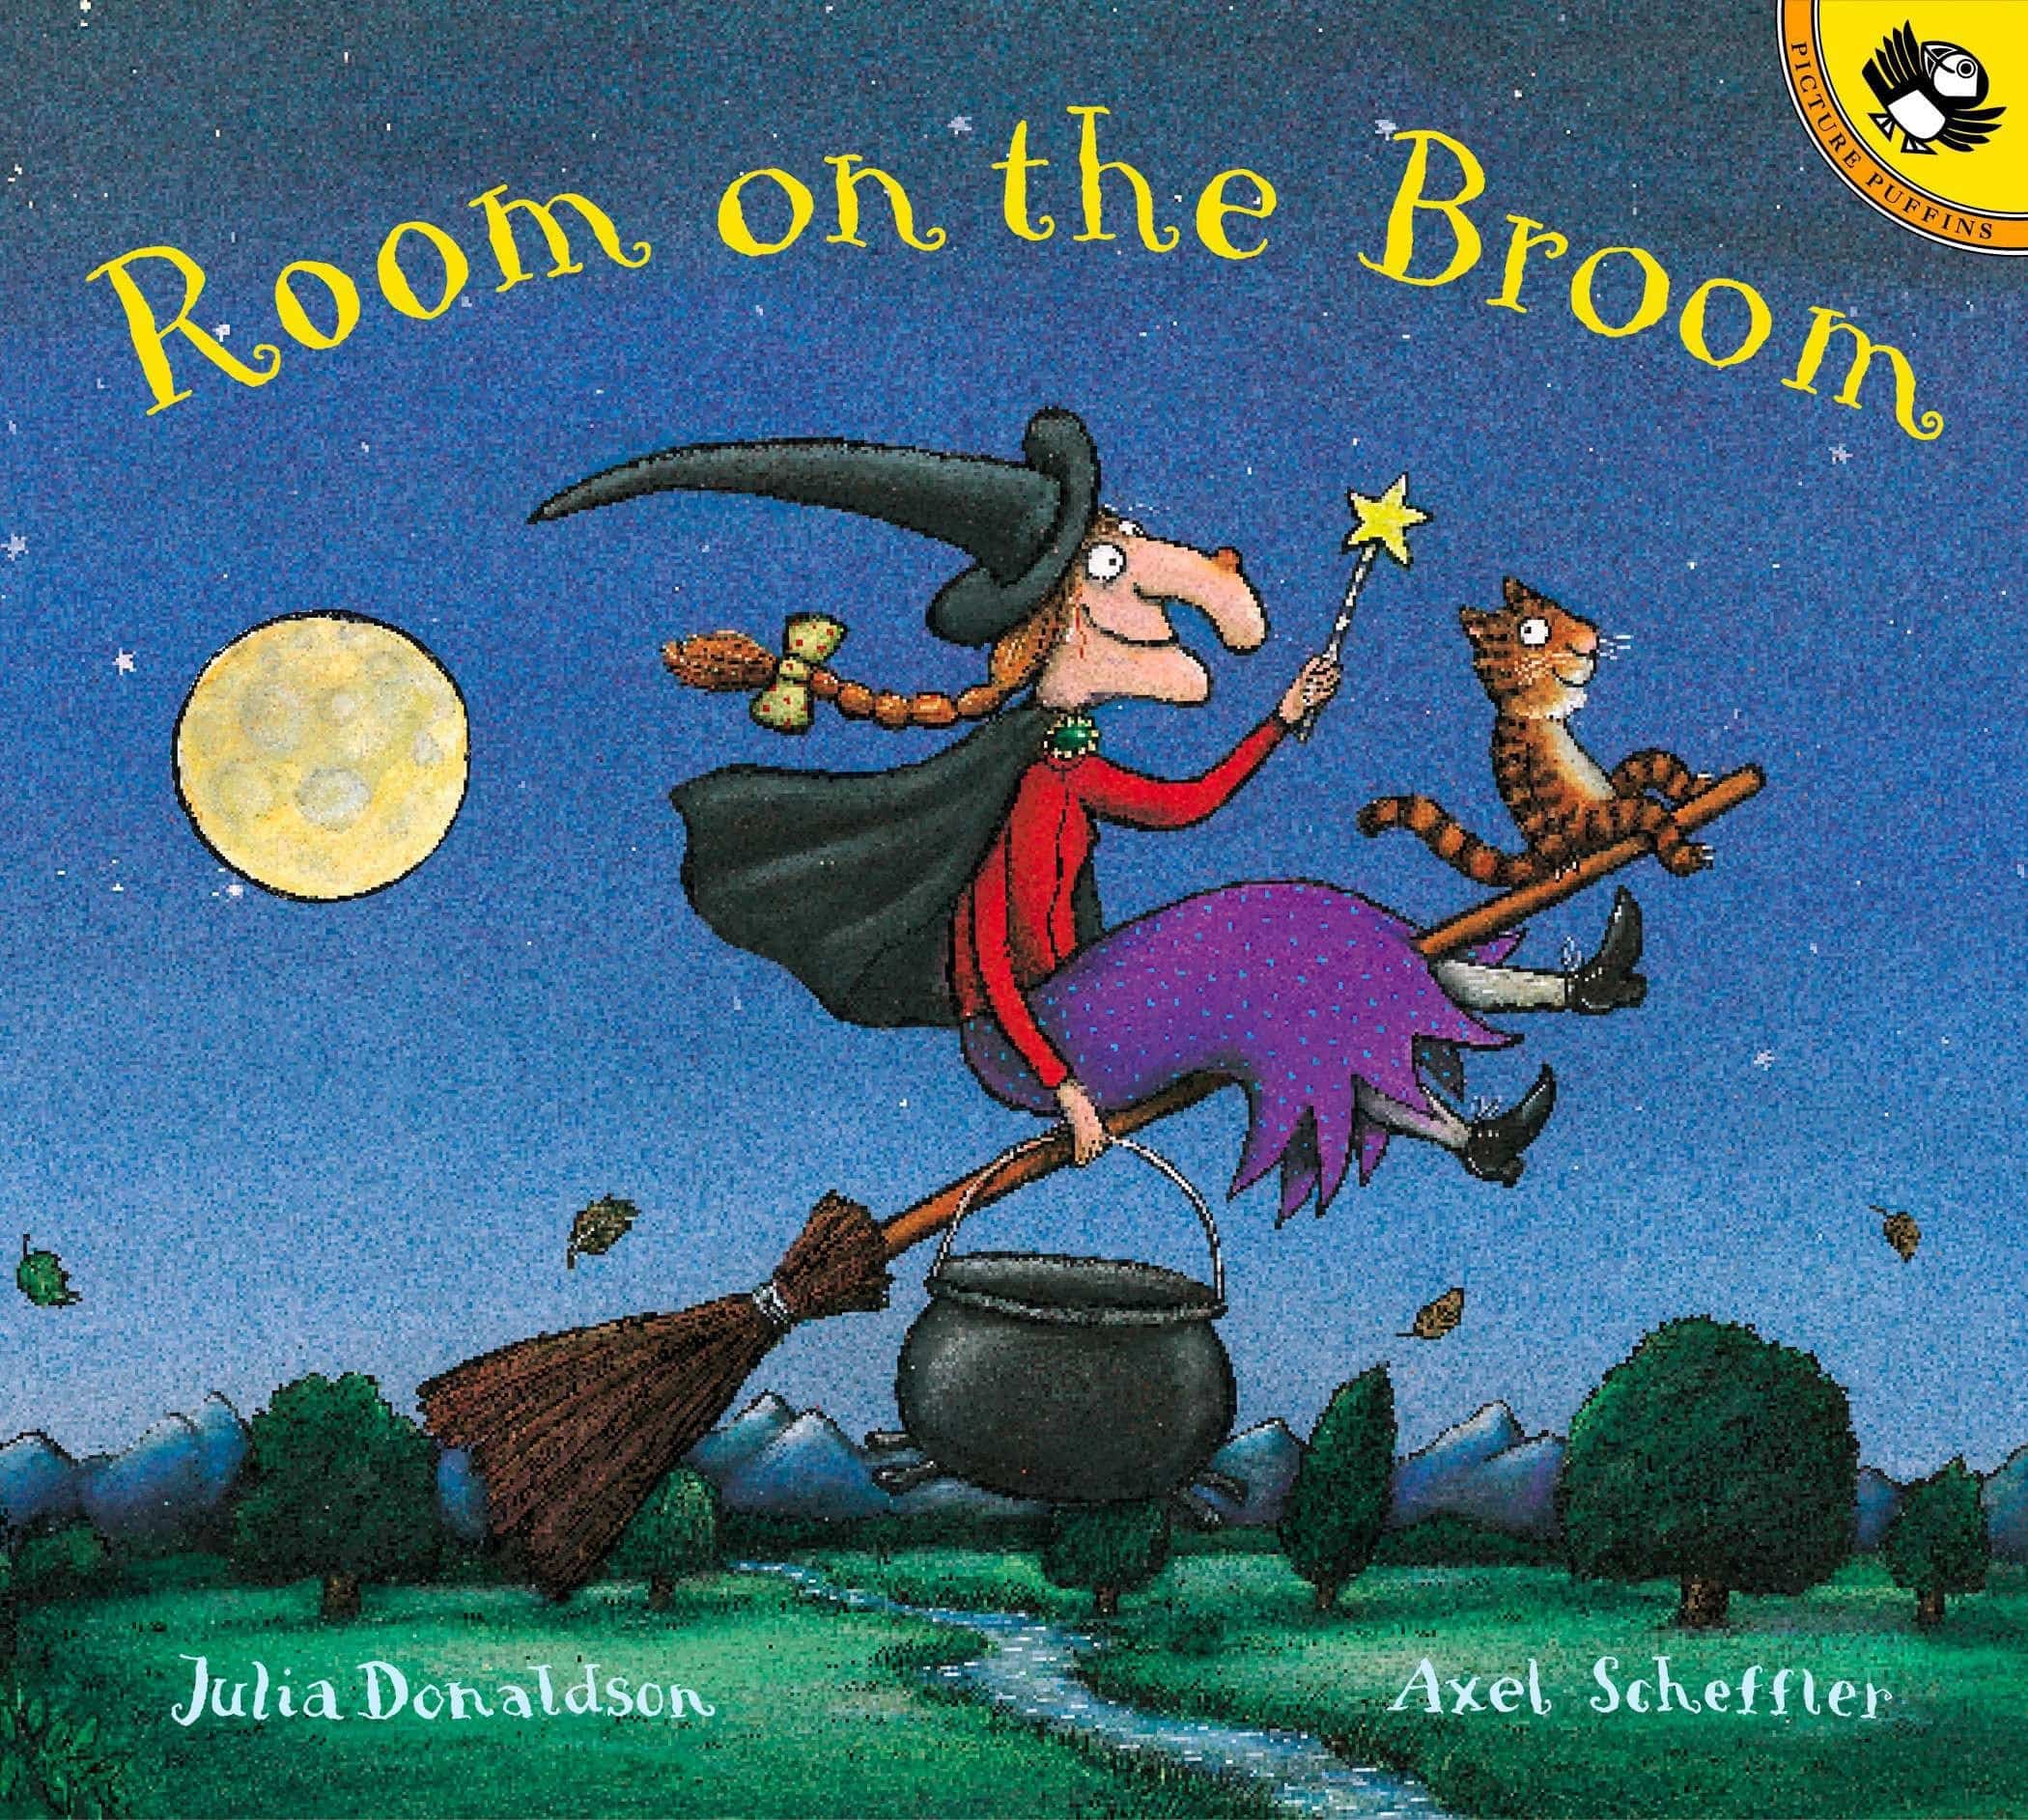 The cover for the book Room on the Broom